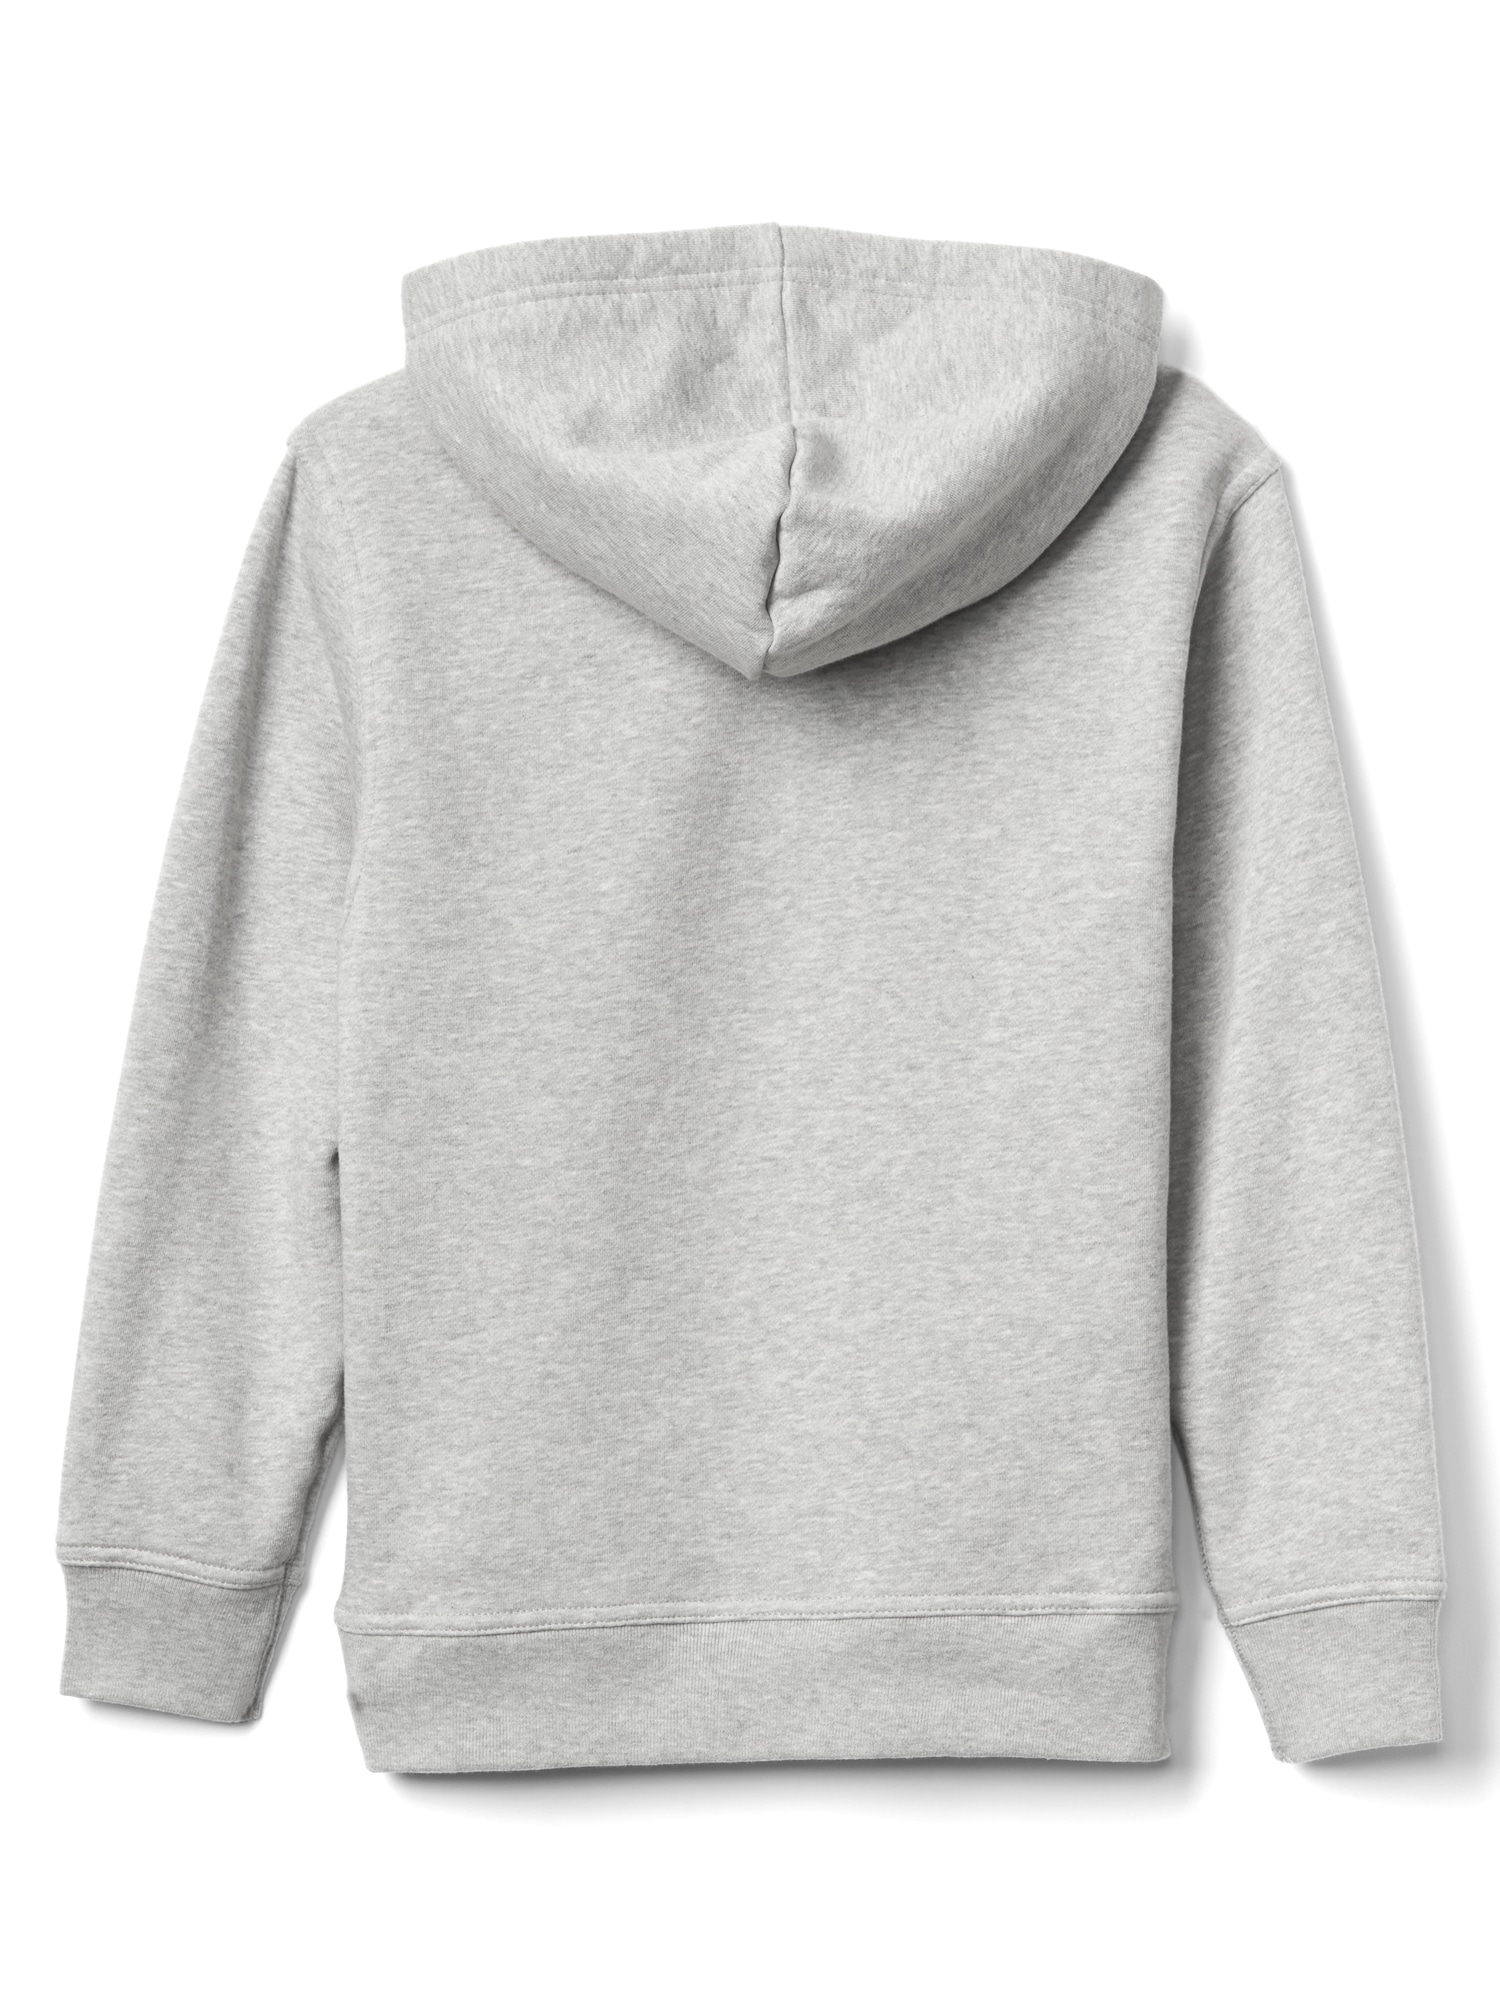 Hoodie With Photo On It Top Sellers, 57% OFF | www.ingeniovirtual.com